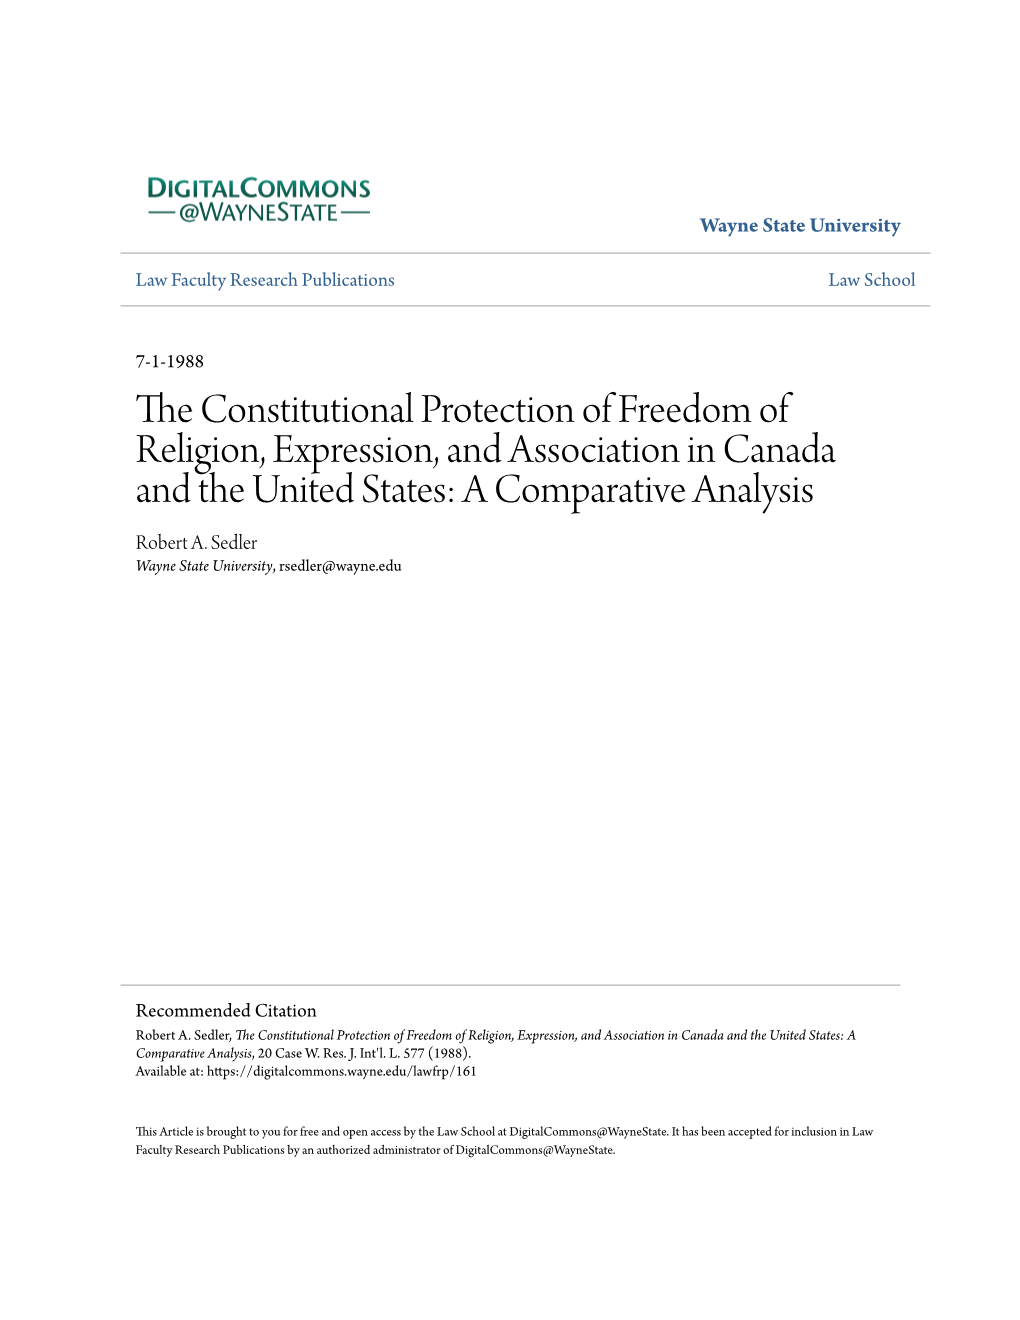 The Constitutional Protection of Freedom of Religion, Expression, and Association in Canada and the United States: a Comparative Analysis, 20 Case W